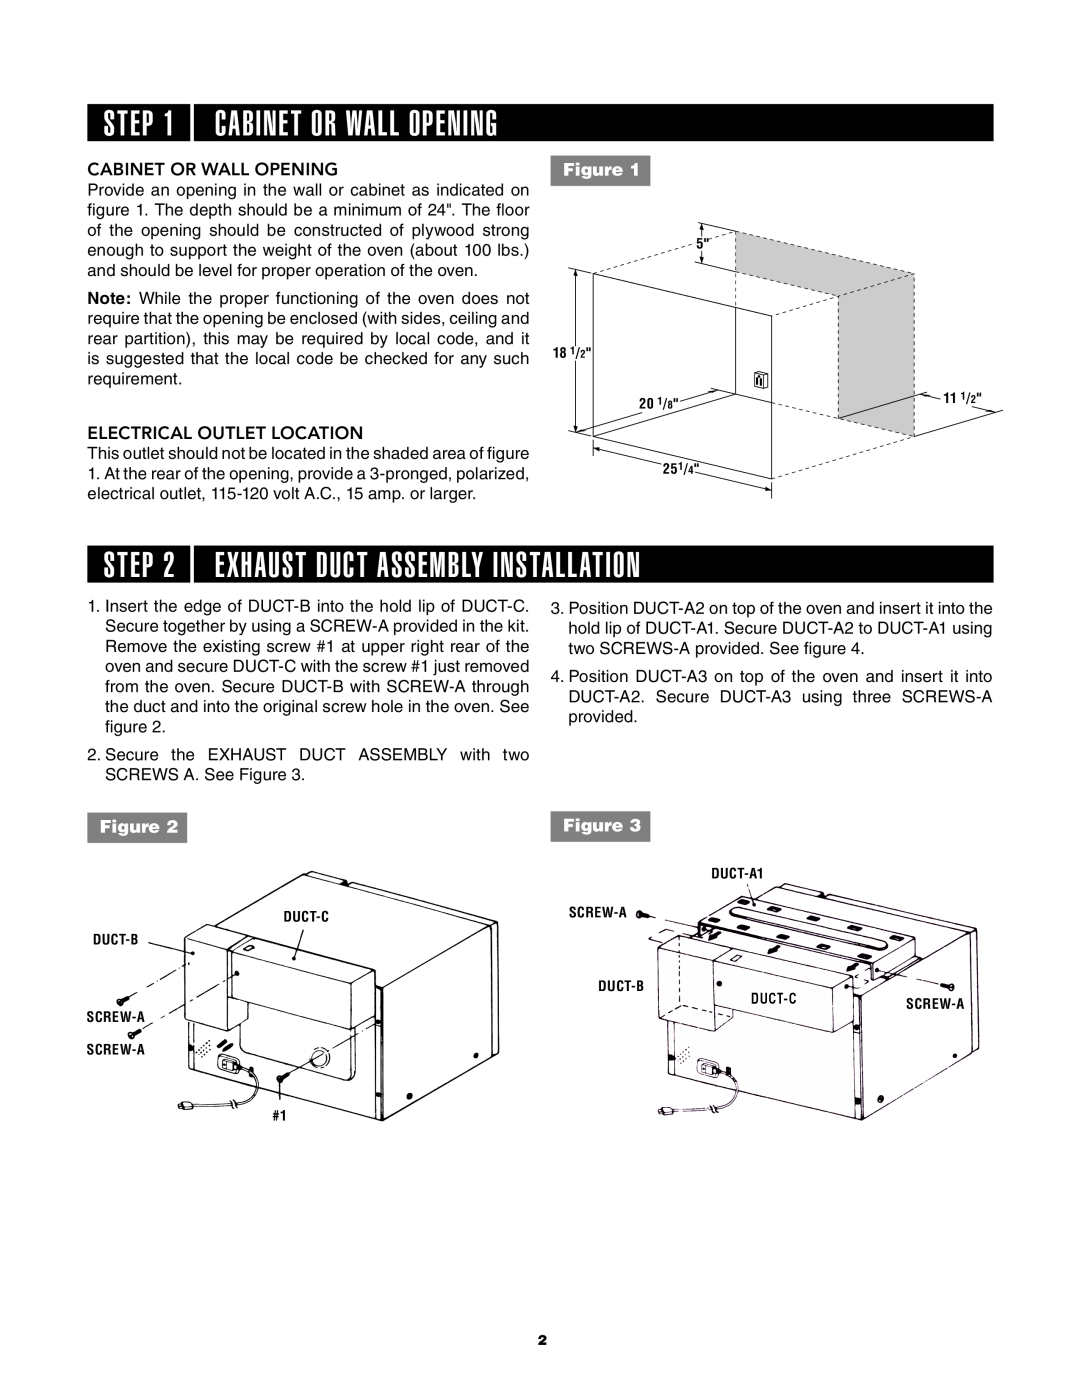 Dacor AOCTK27 installation instructions Exhaust Duct Assembly Installation, Cabinet Or Wall Opening 